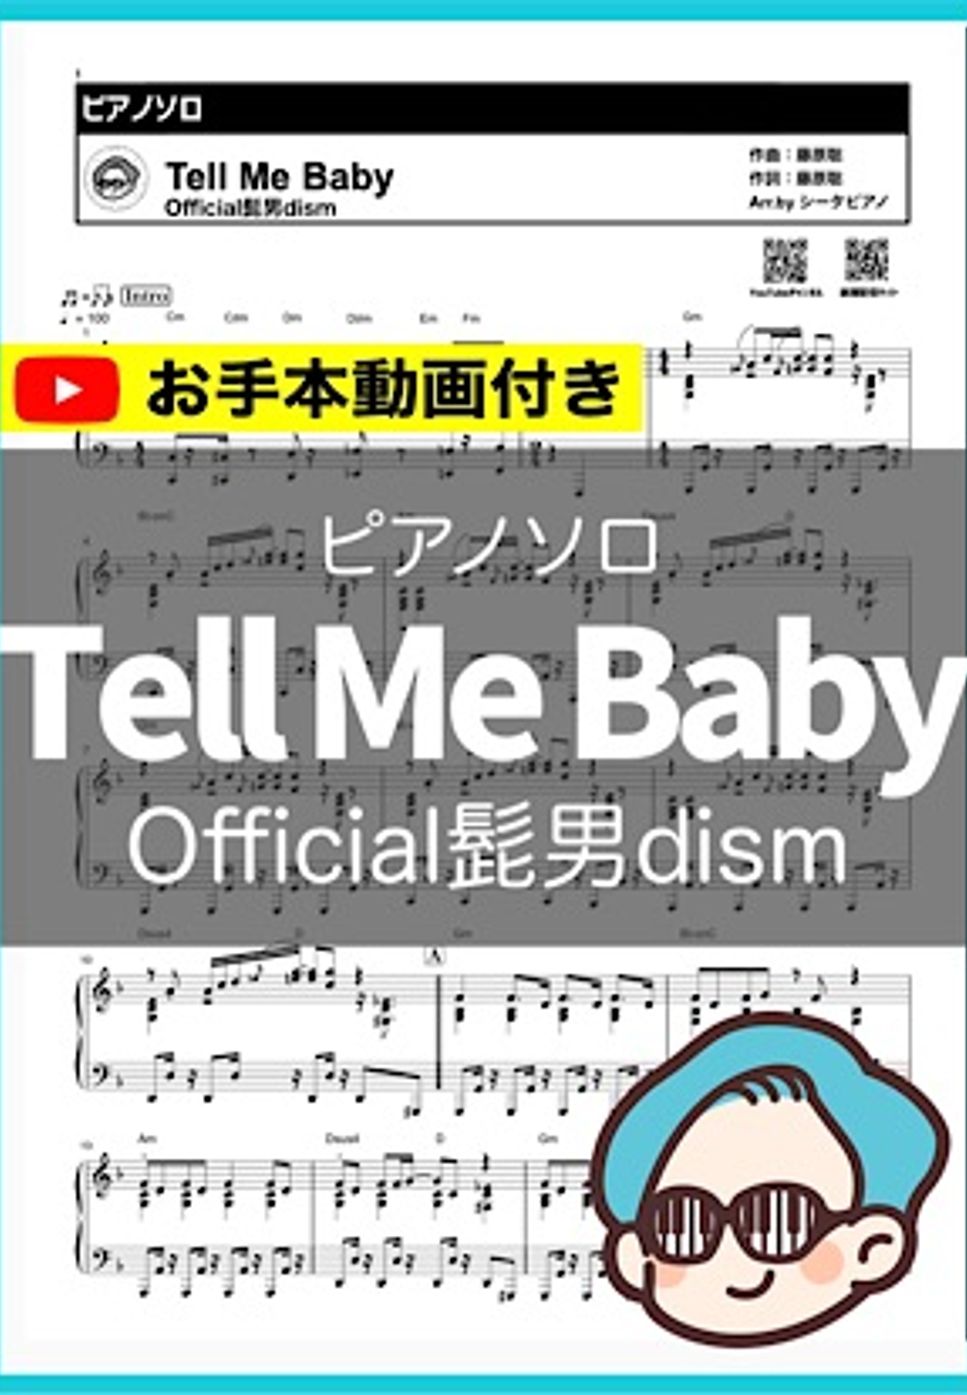 Official髭男dism - Tell Me Baby by シータピアノ